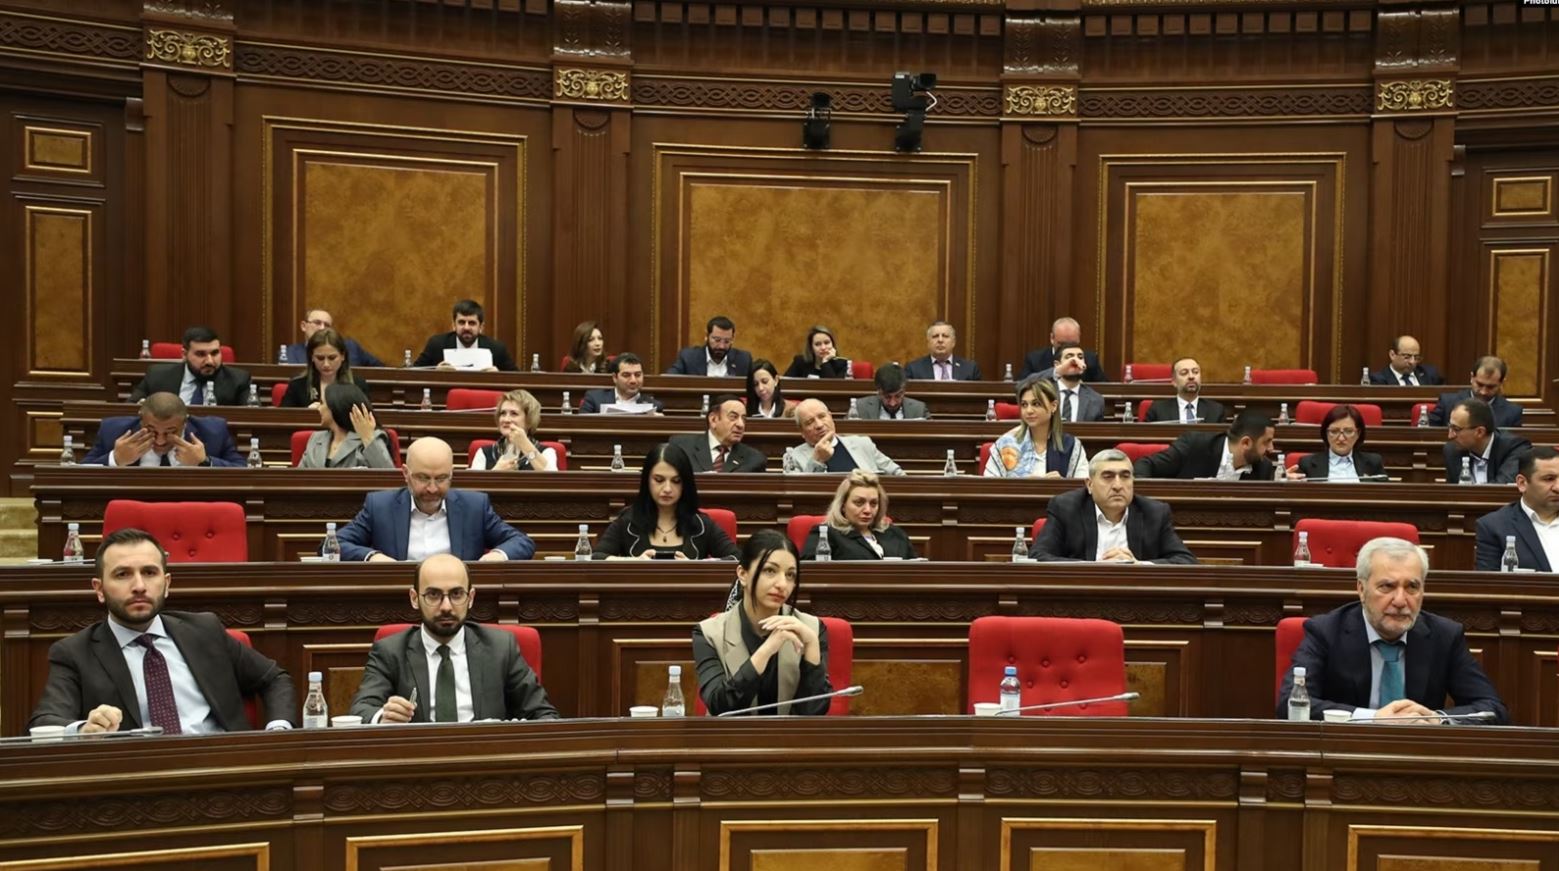 Pashinyan's Party Refuses To Support Artsakh Self-Determination in Parliament